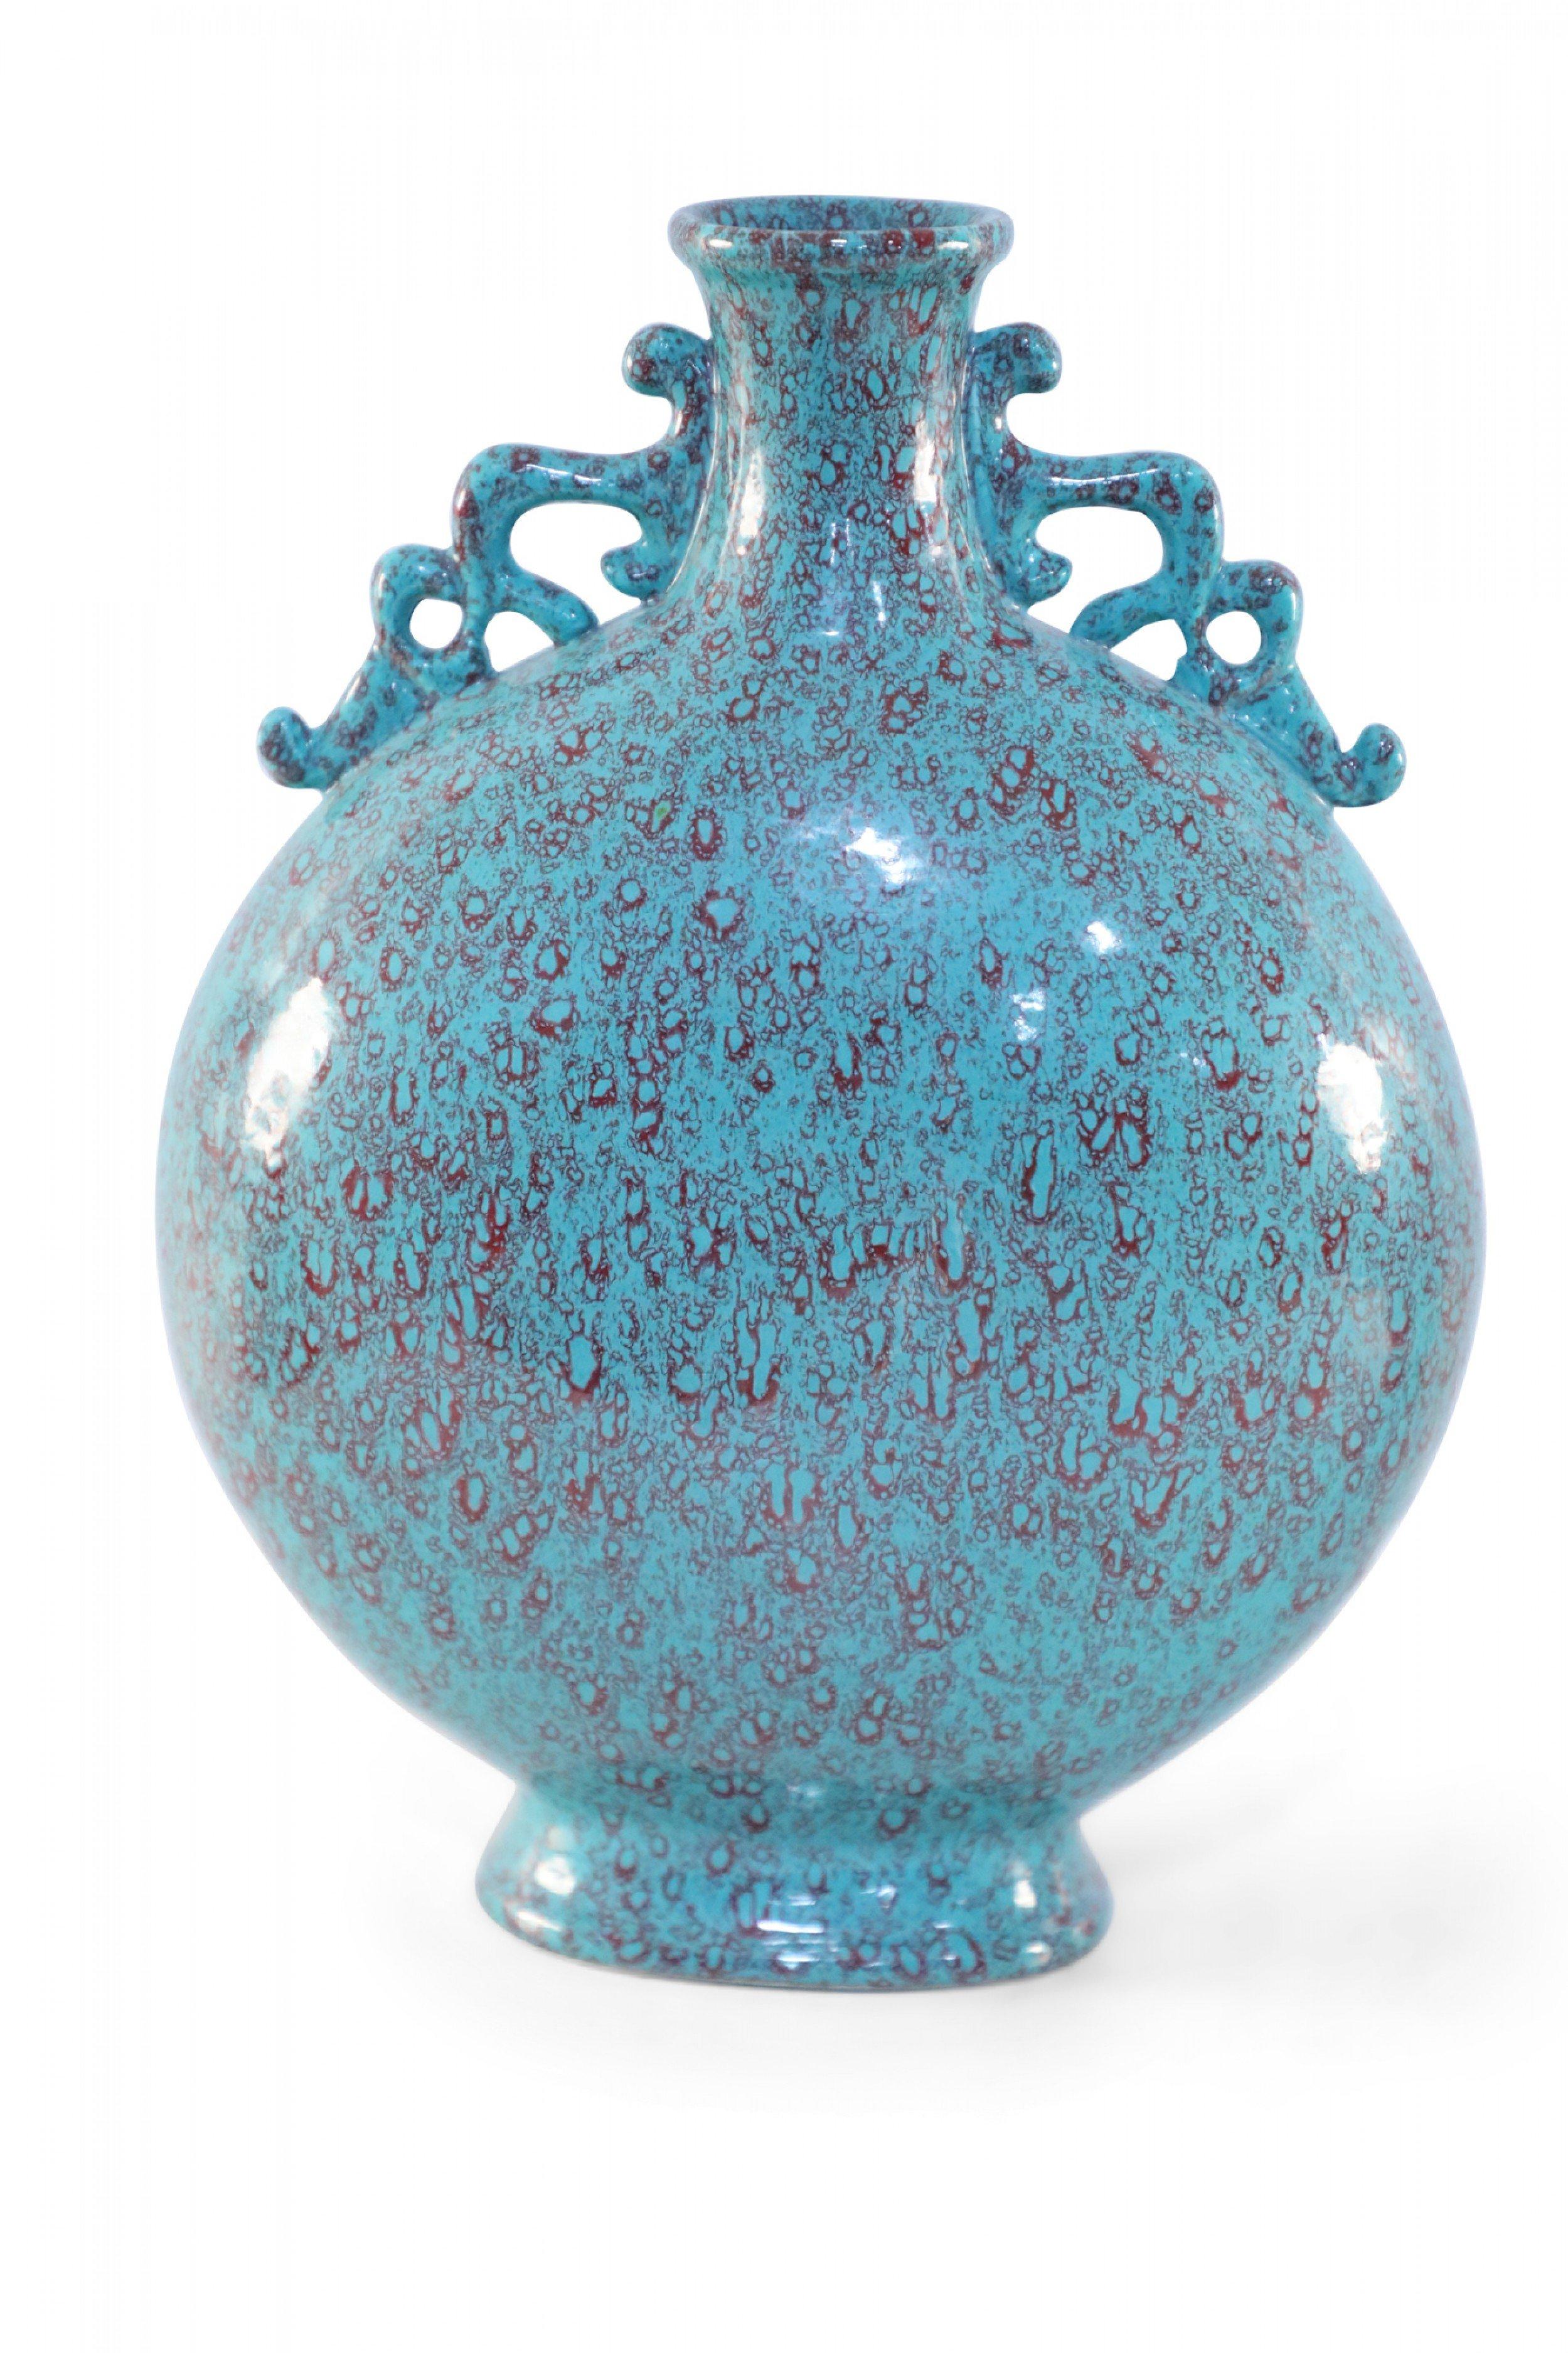 19th Century Chinese Teal and Red Crackle Porcelain Moon Flask Vase